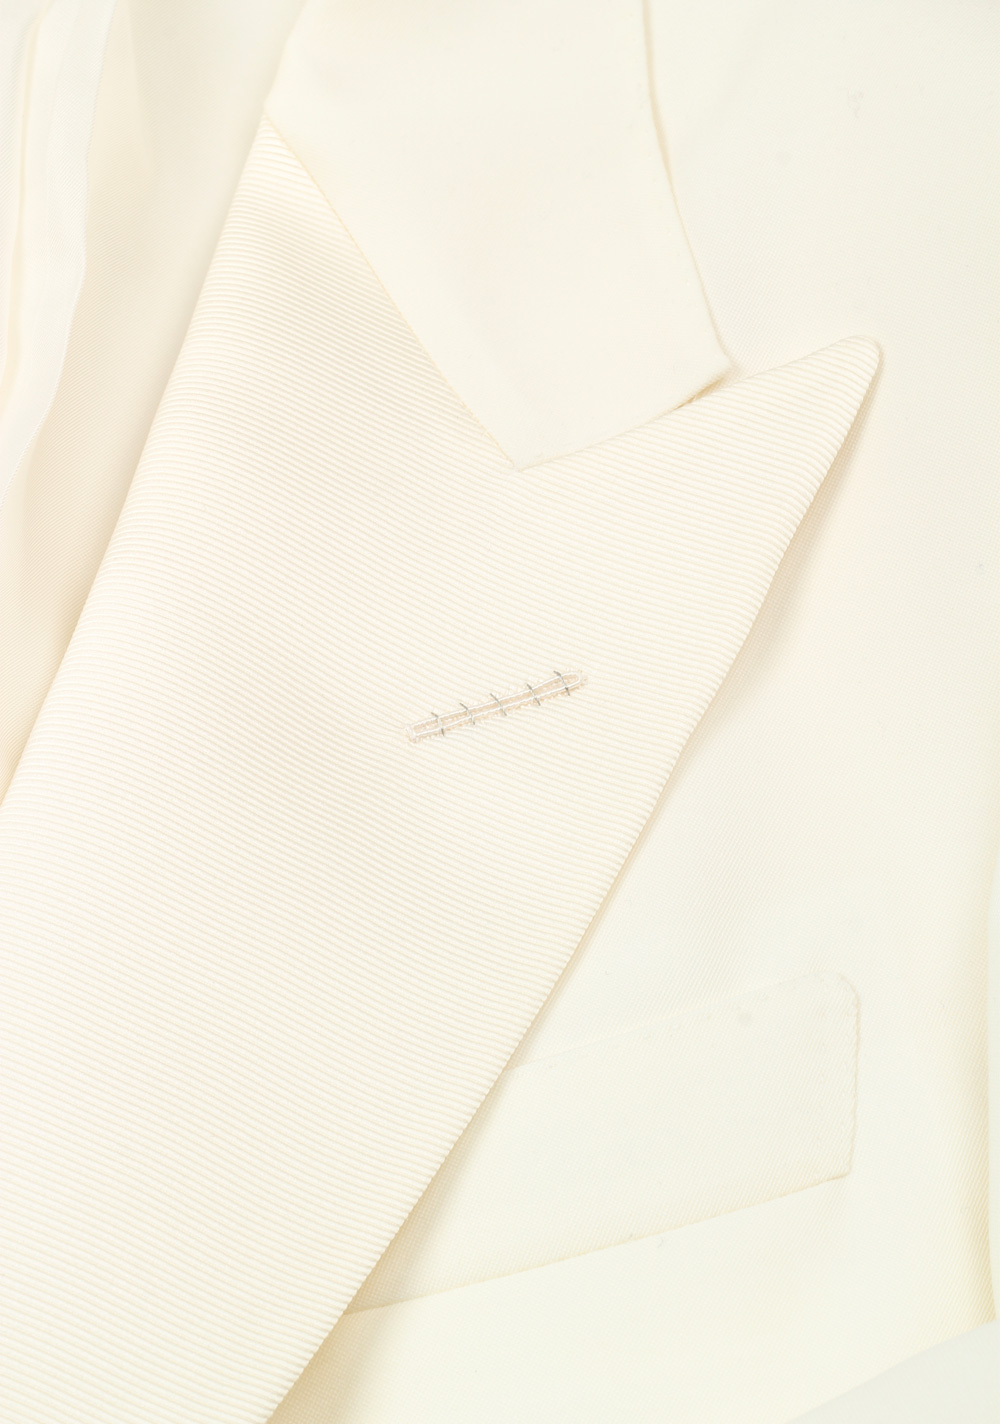 TOM FORD Windsor Ivory Signature Tuxedo Dinner Jacket Size 56 / 46R U.S. Fit A | Costume Limité